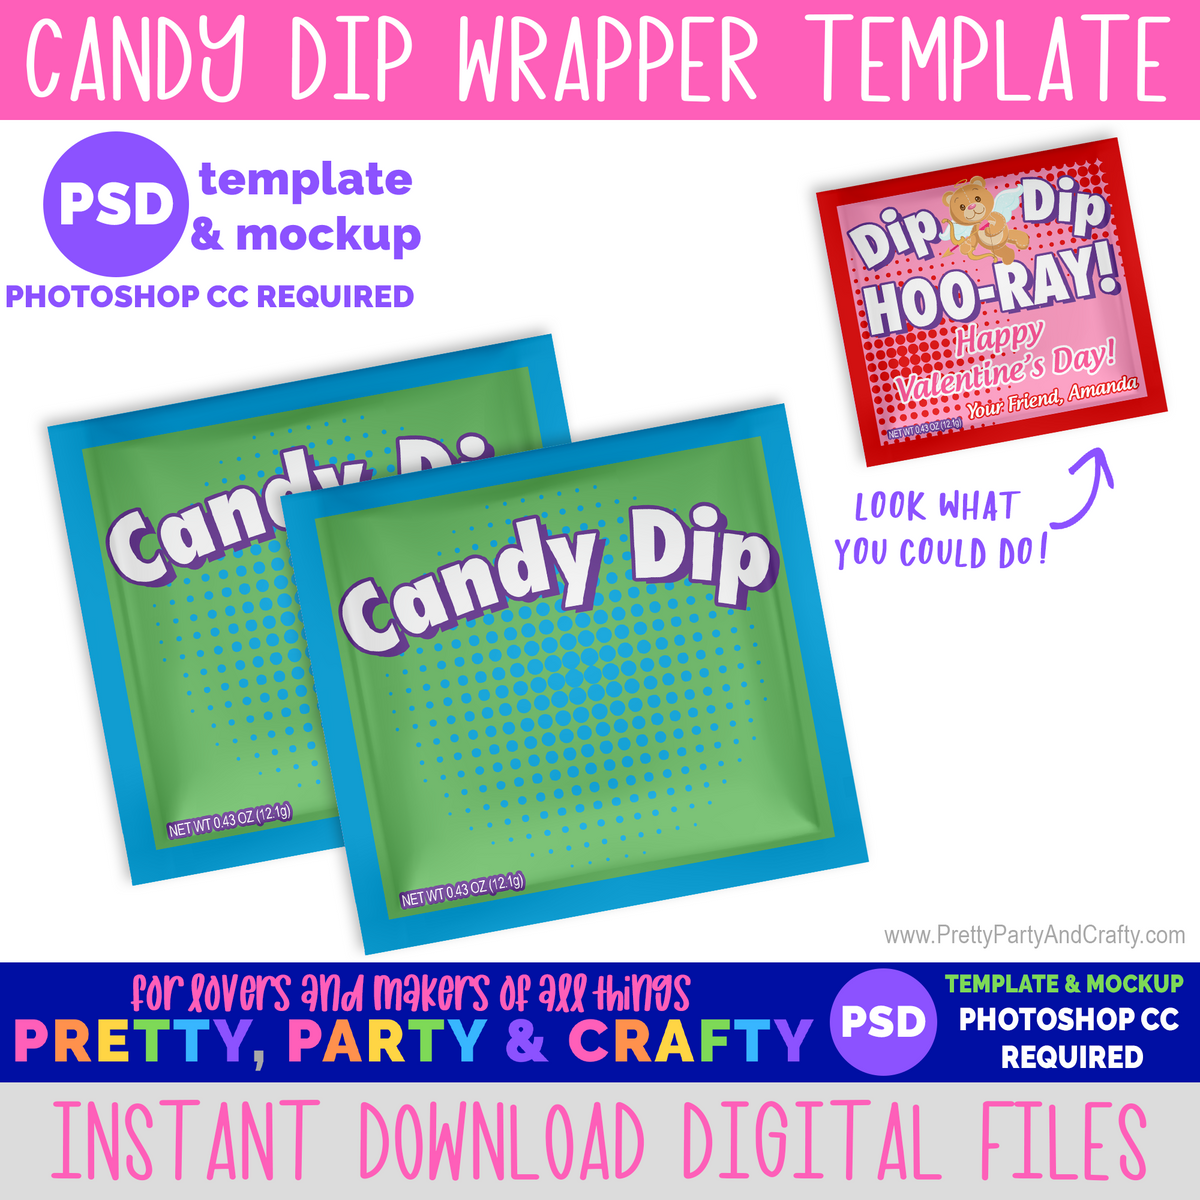 Candy Dip Wrapper Template and Mockup -PHOTOSHOP